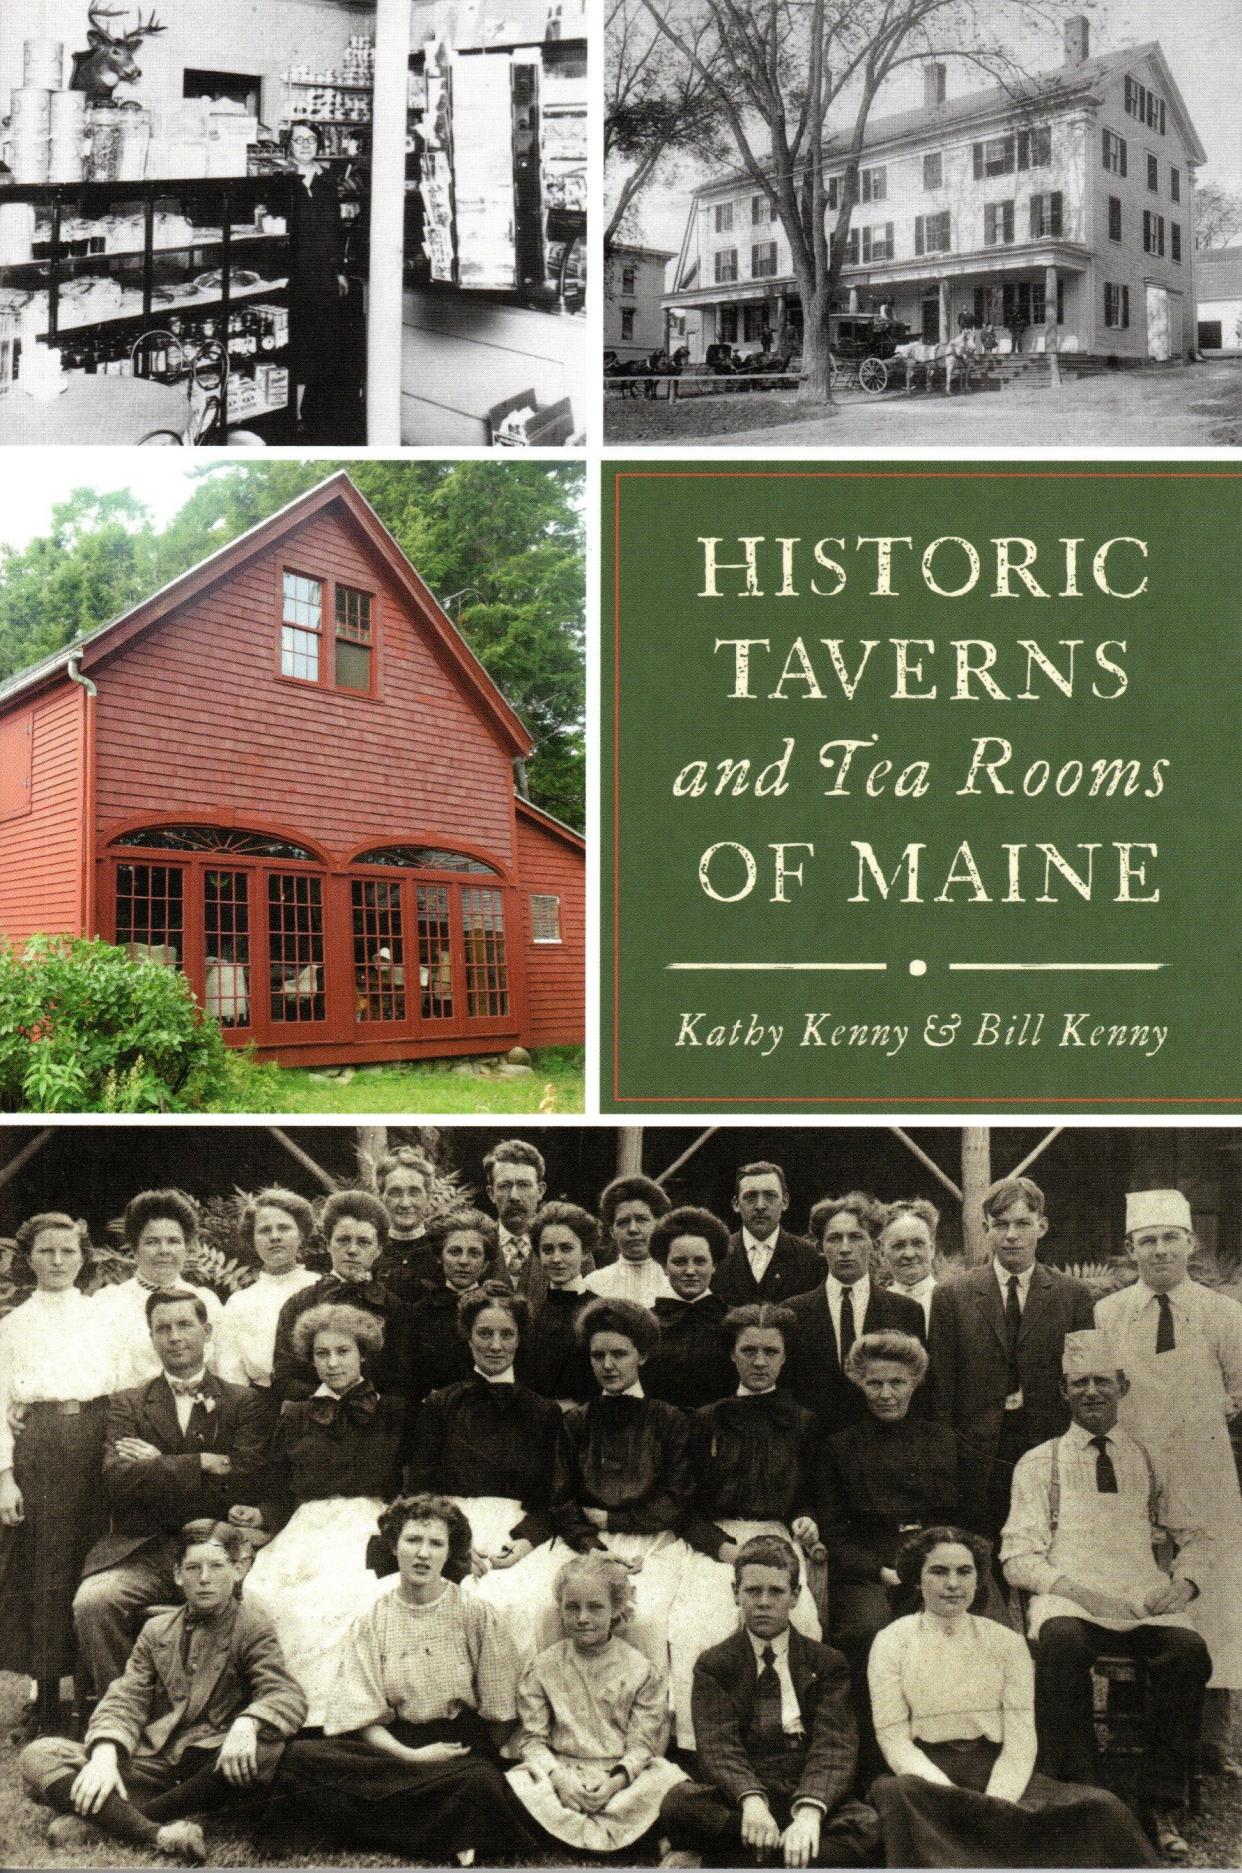 Book cover of "Historic Taverns and Tea Rooms of Maine" by Kathy Kenny and Bill Kenny.